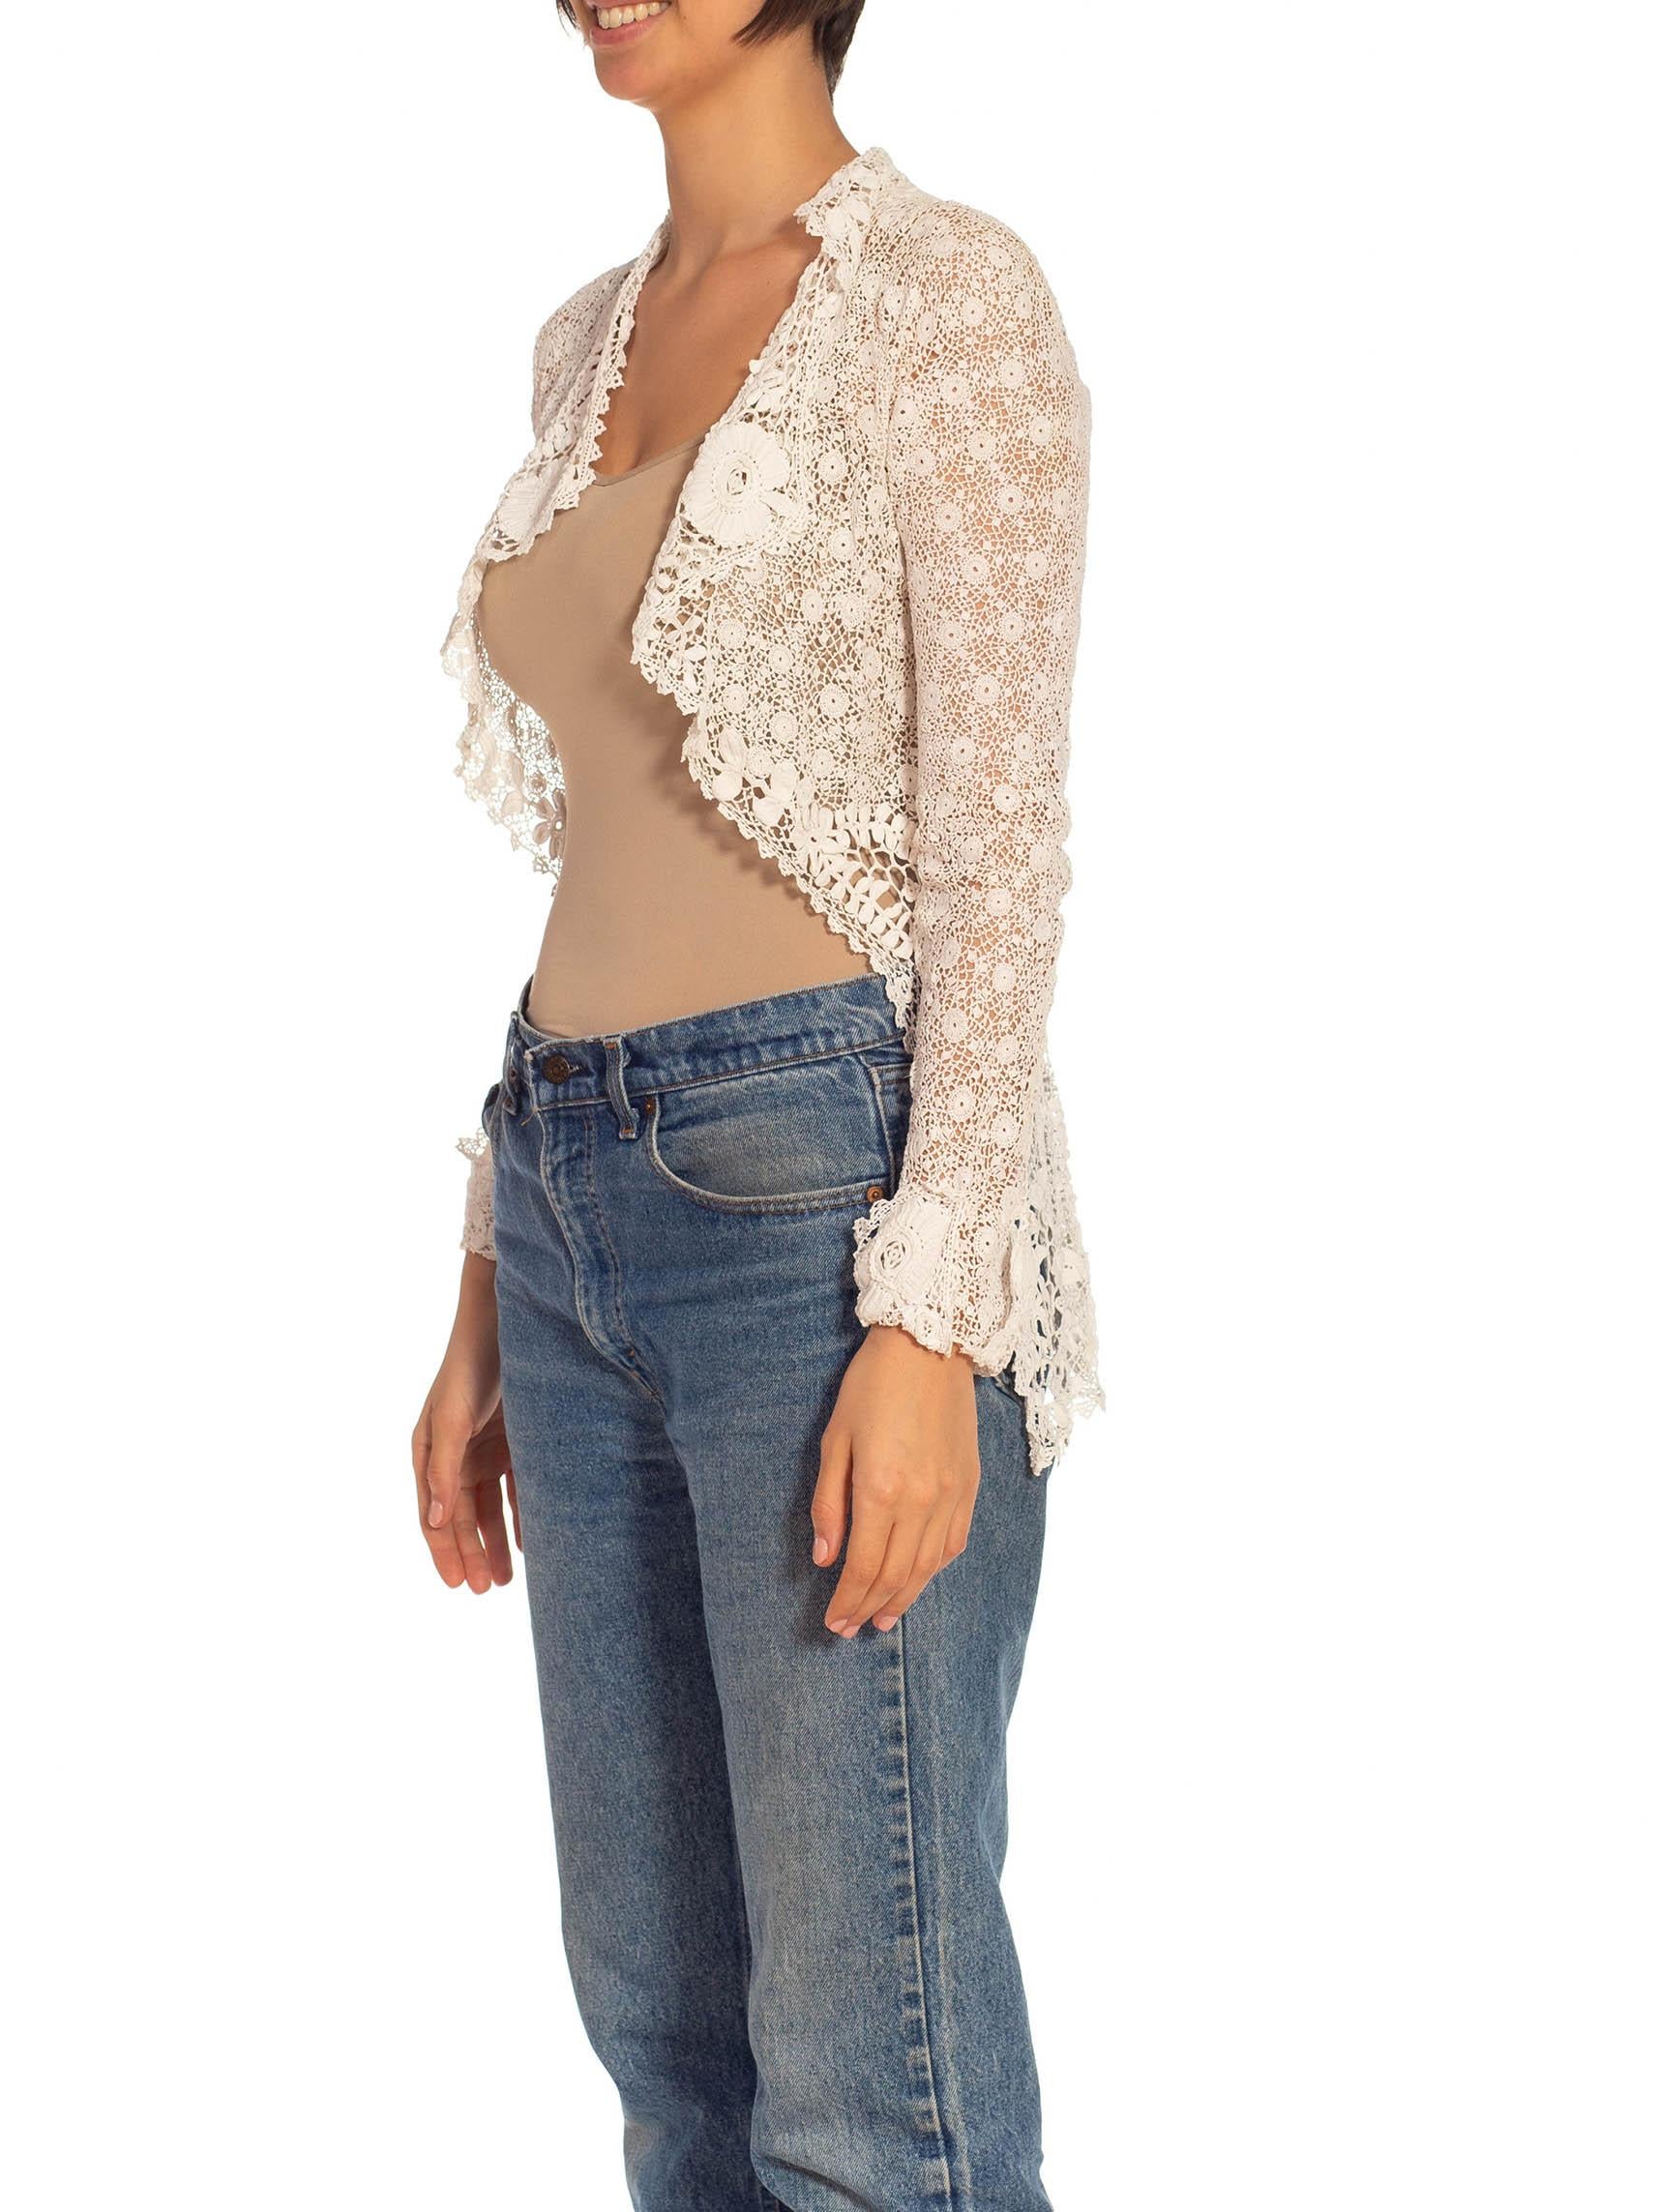 Victorian White Irish Crochet Jacket With Long Sleeves For Sale 1